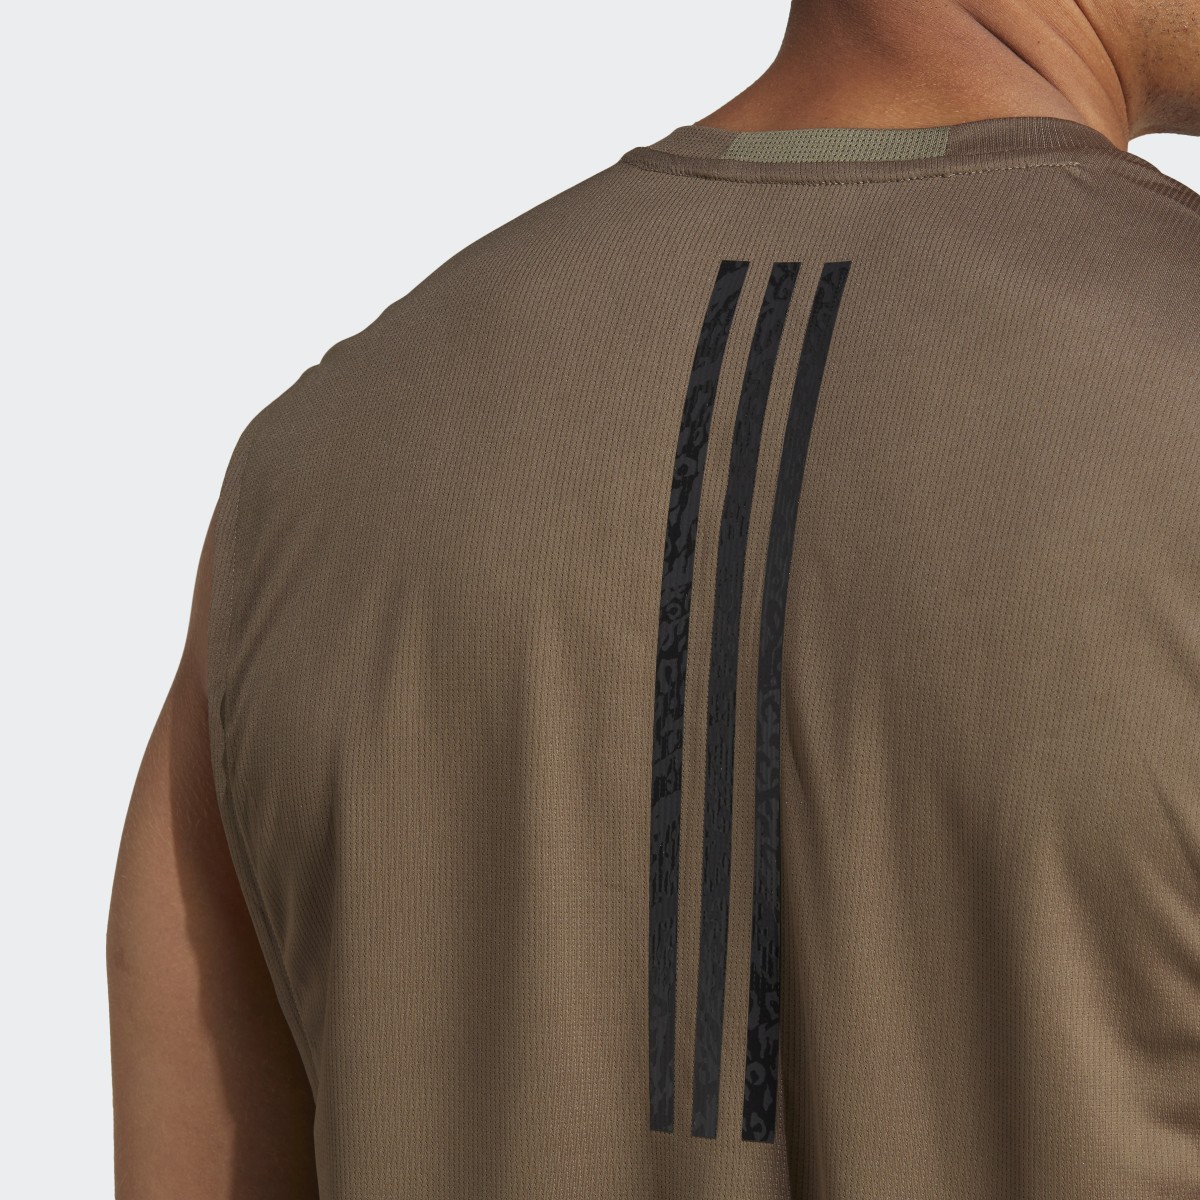 Adidas HIIT Tank Curated By Cody Rigsby. 7